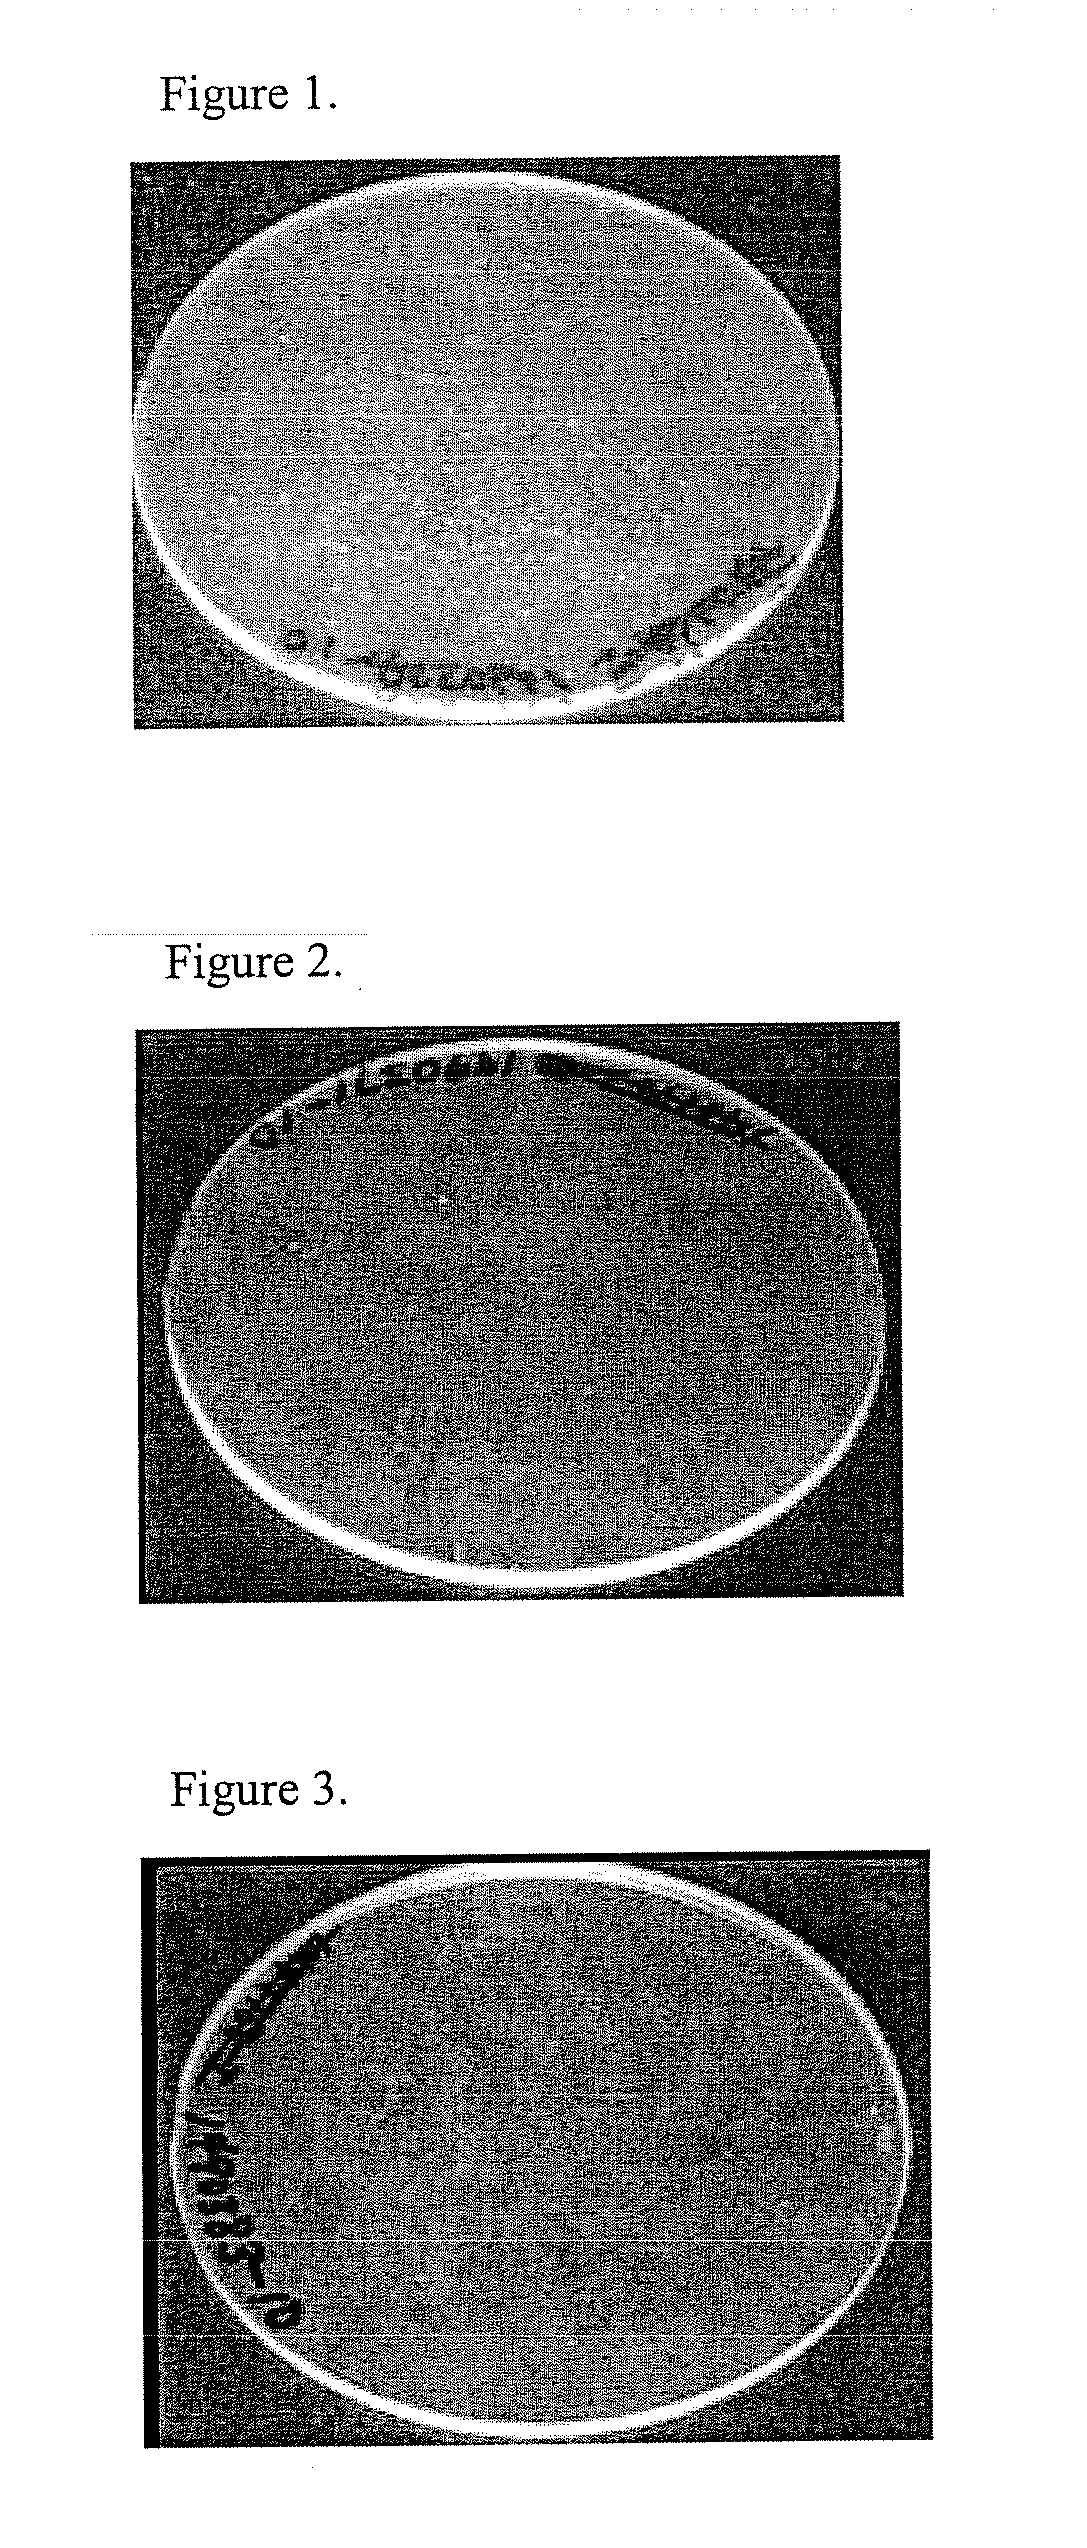 Thermoplastic composition, method of making, and articles formed therefrom